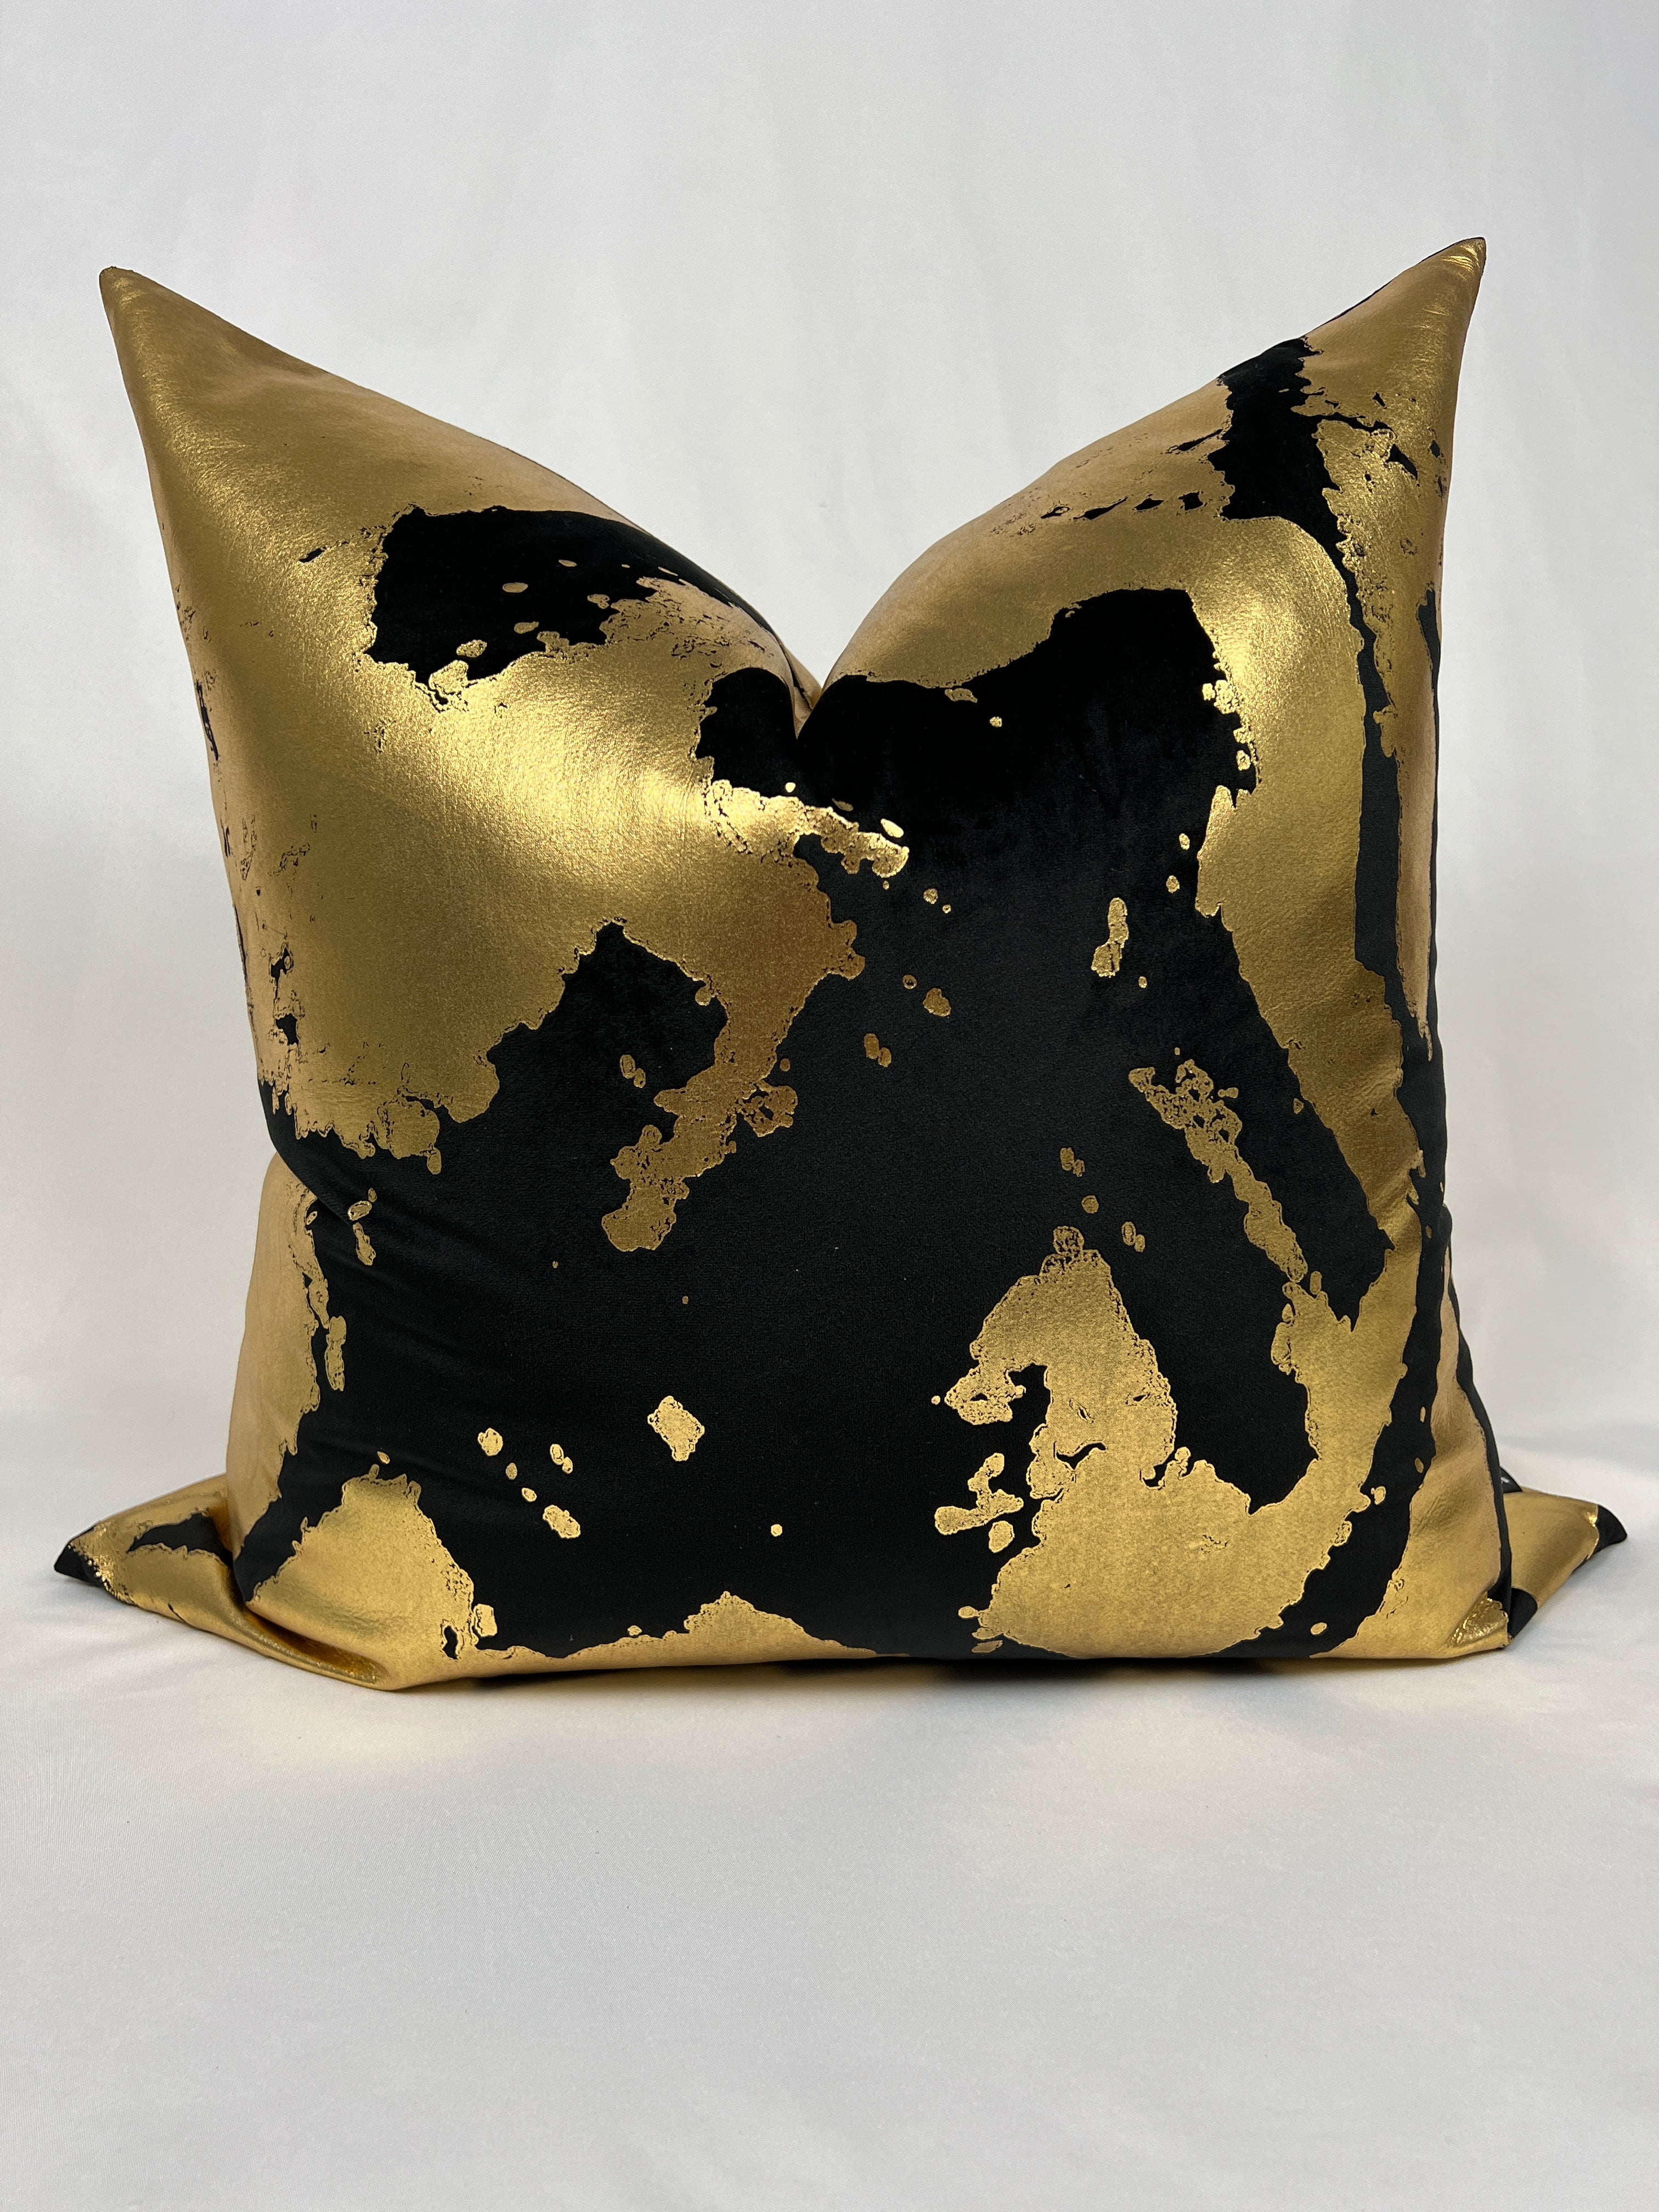 The Luxe Gold & Black Pillow